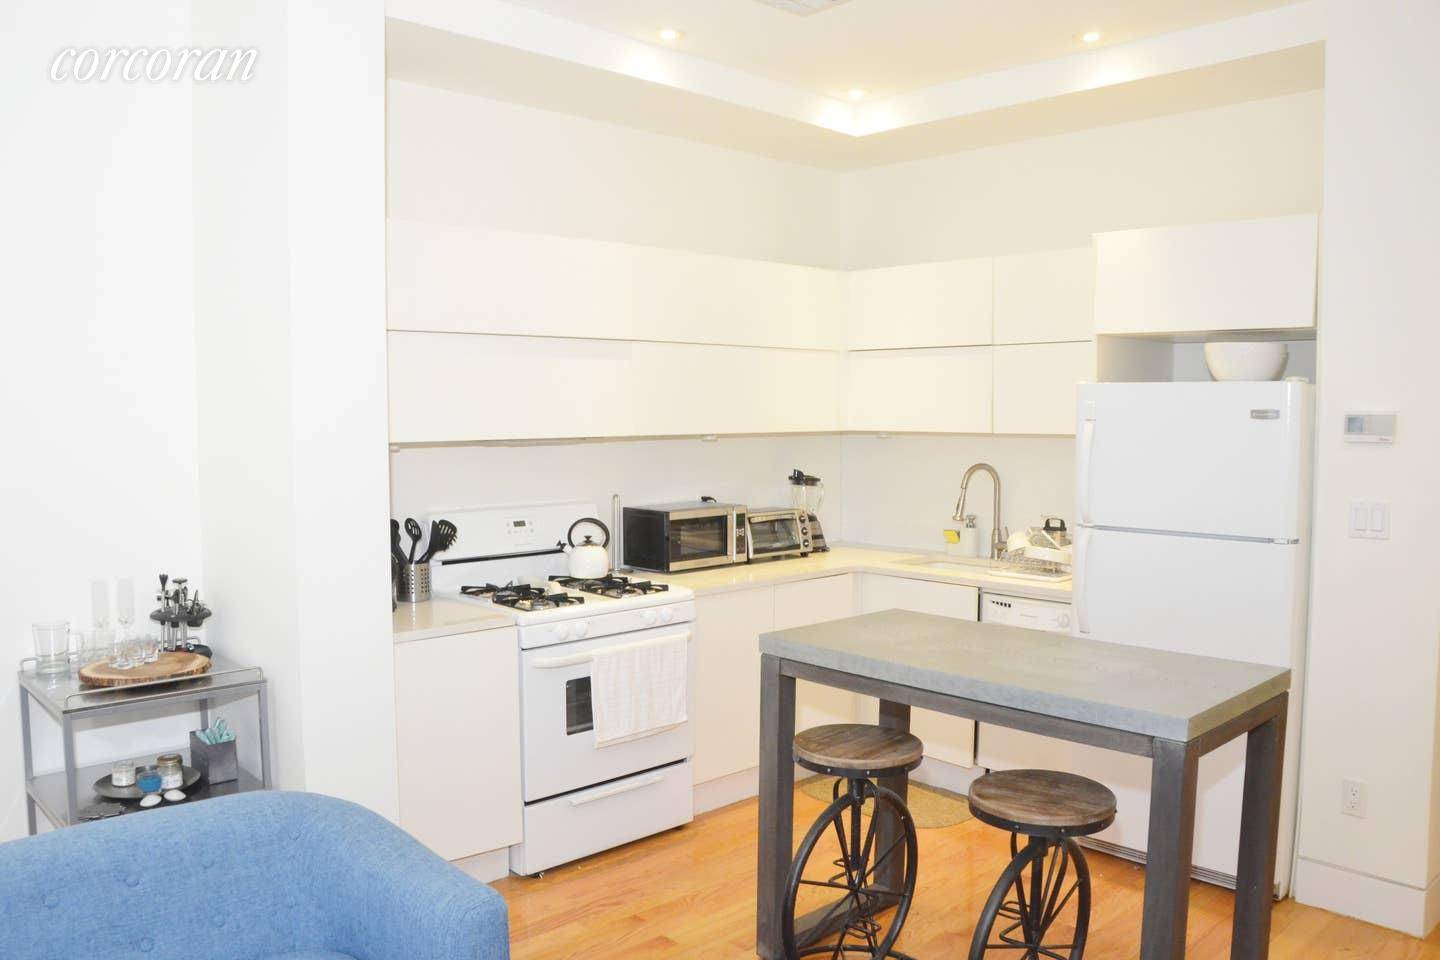 Beautiful and spacious duplex 1 bedroom apartment in a boutique condo building.